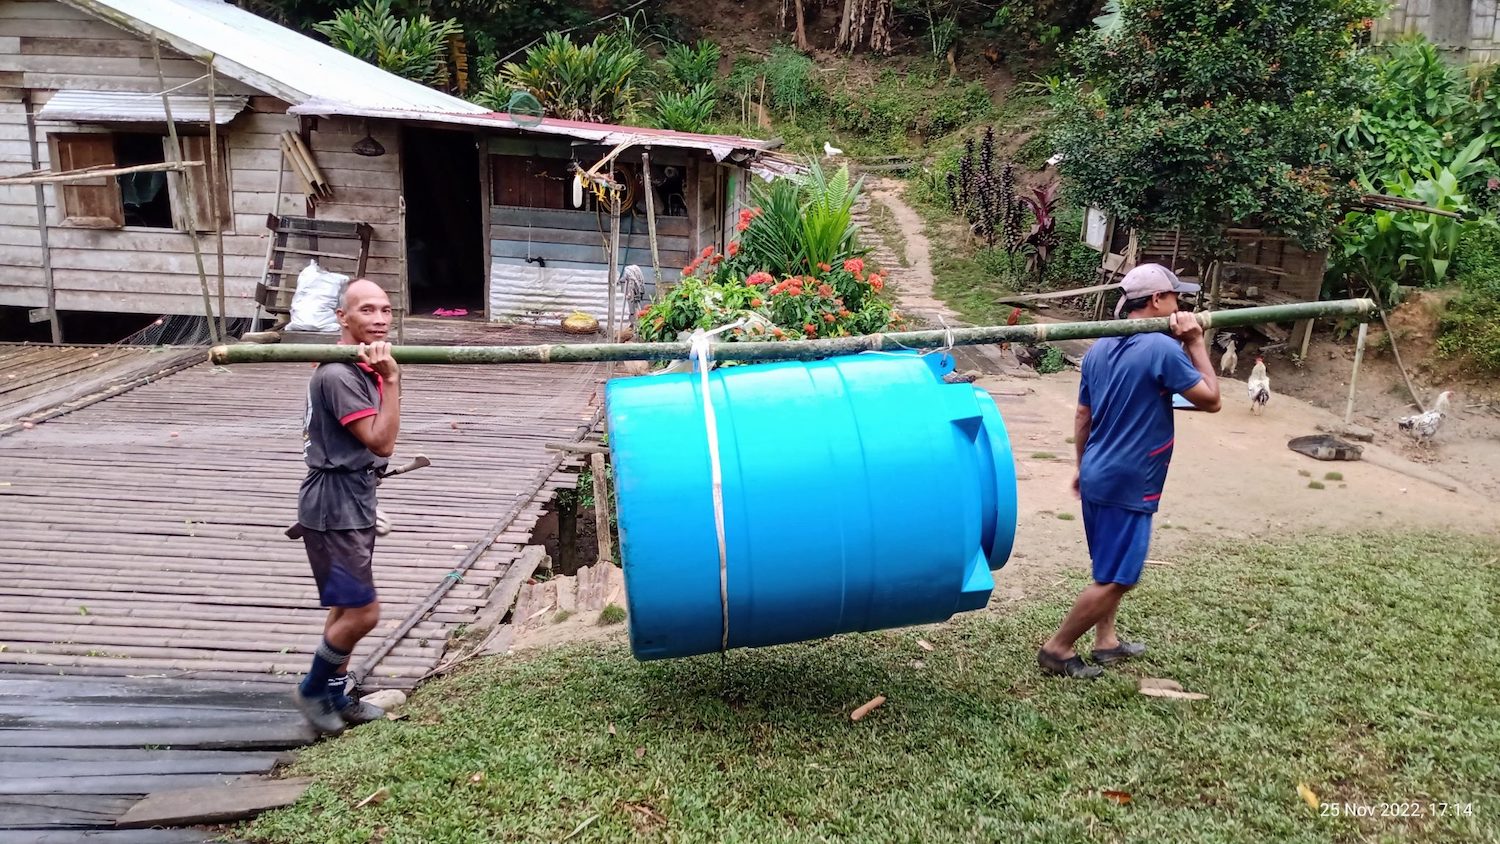 Villagers carrying piece of water supply system